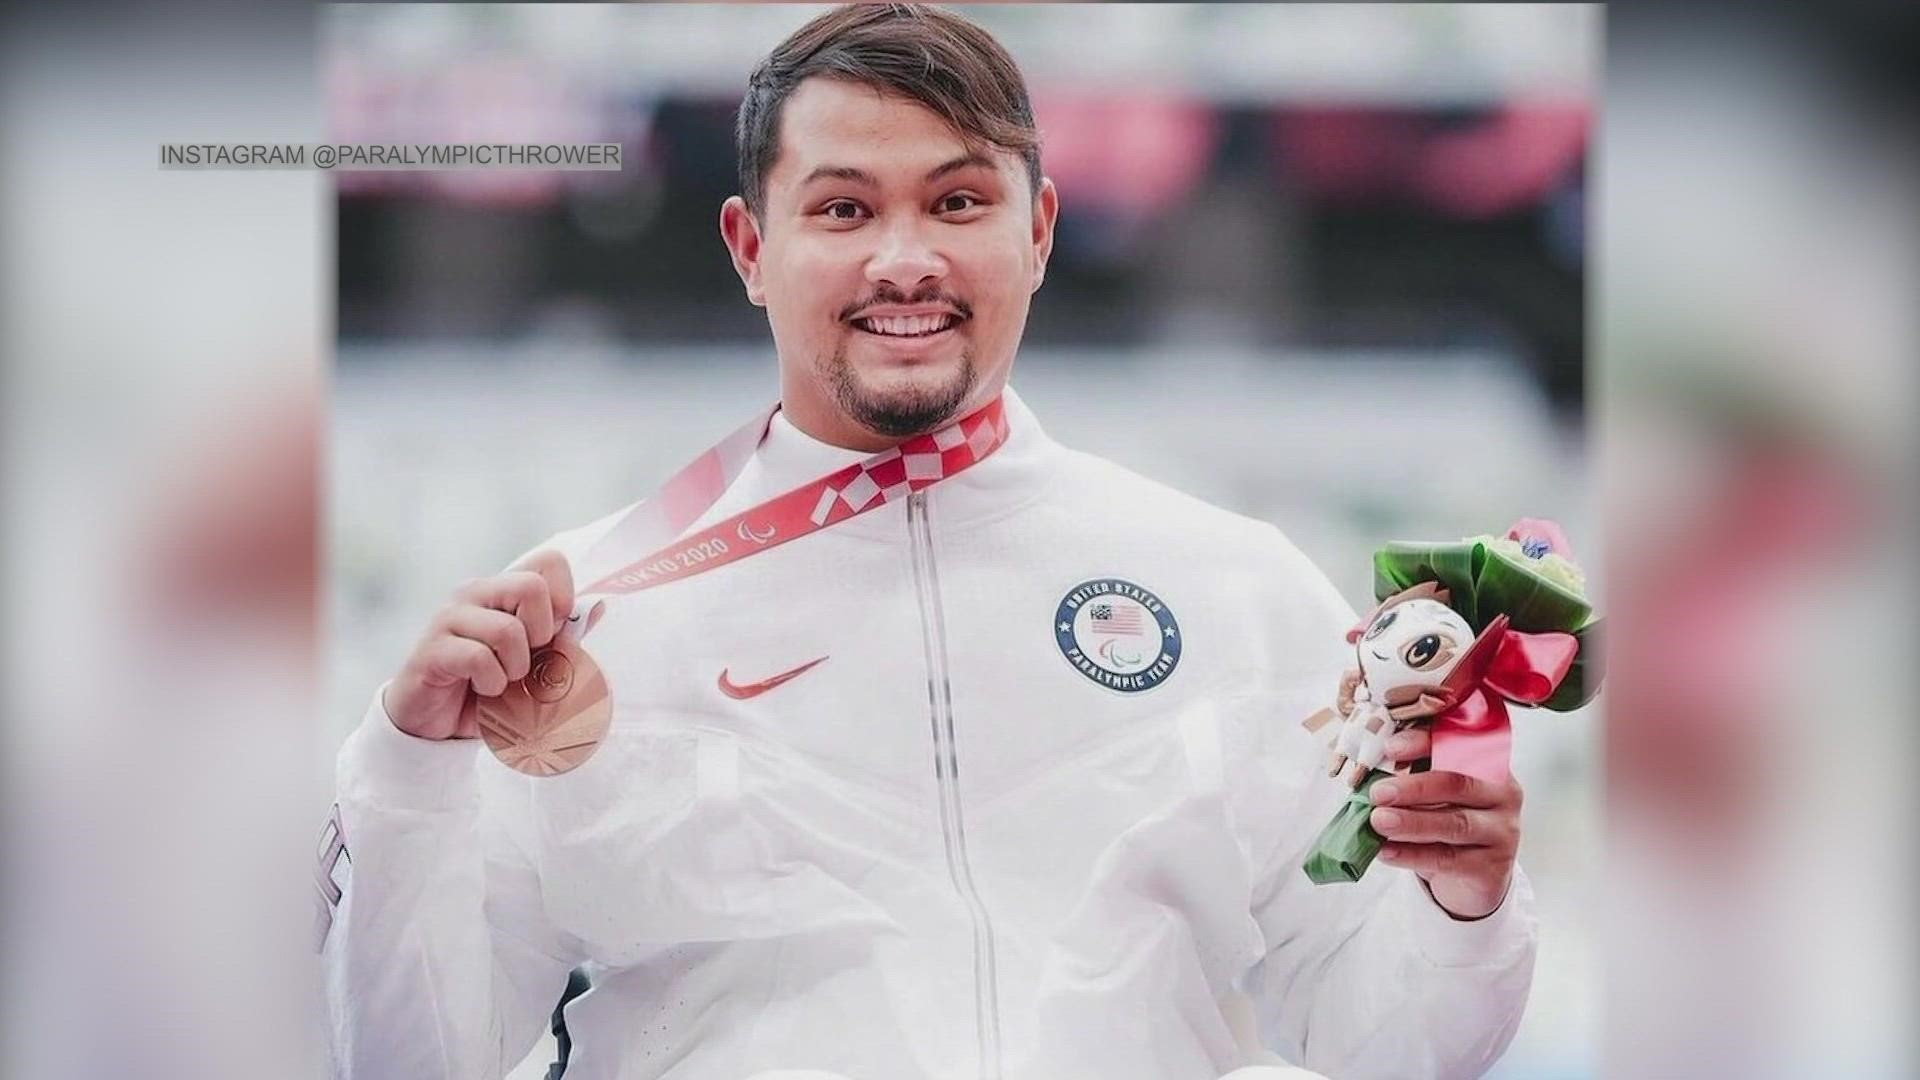 In 2015, Justin Phongsavanh was shot and paralyzed from the waist down. Six years later, he set a world record in the javelin throw.